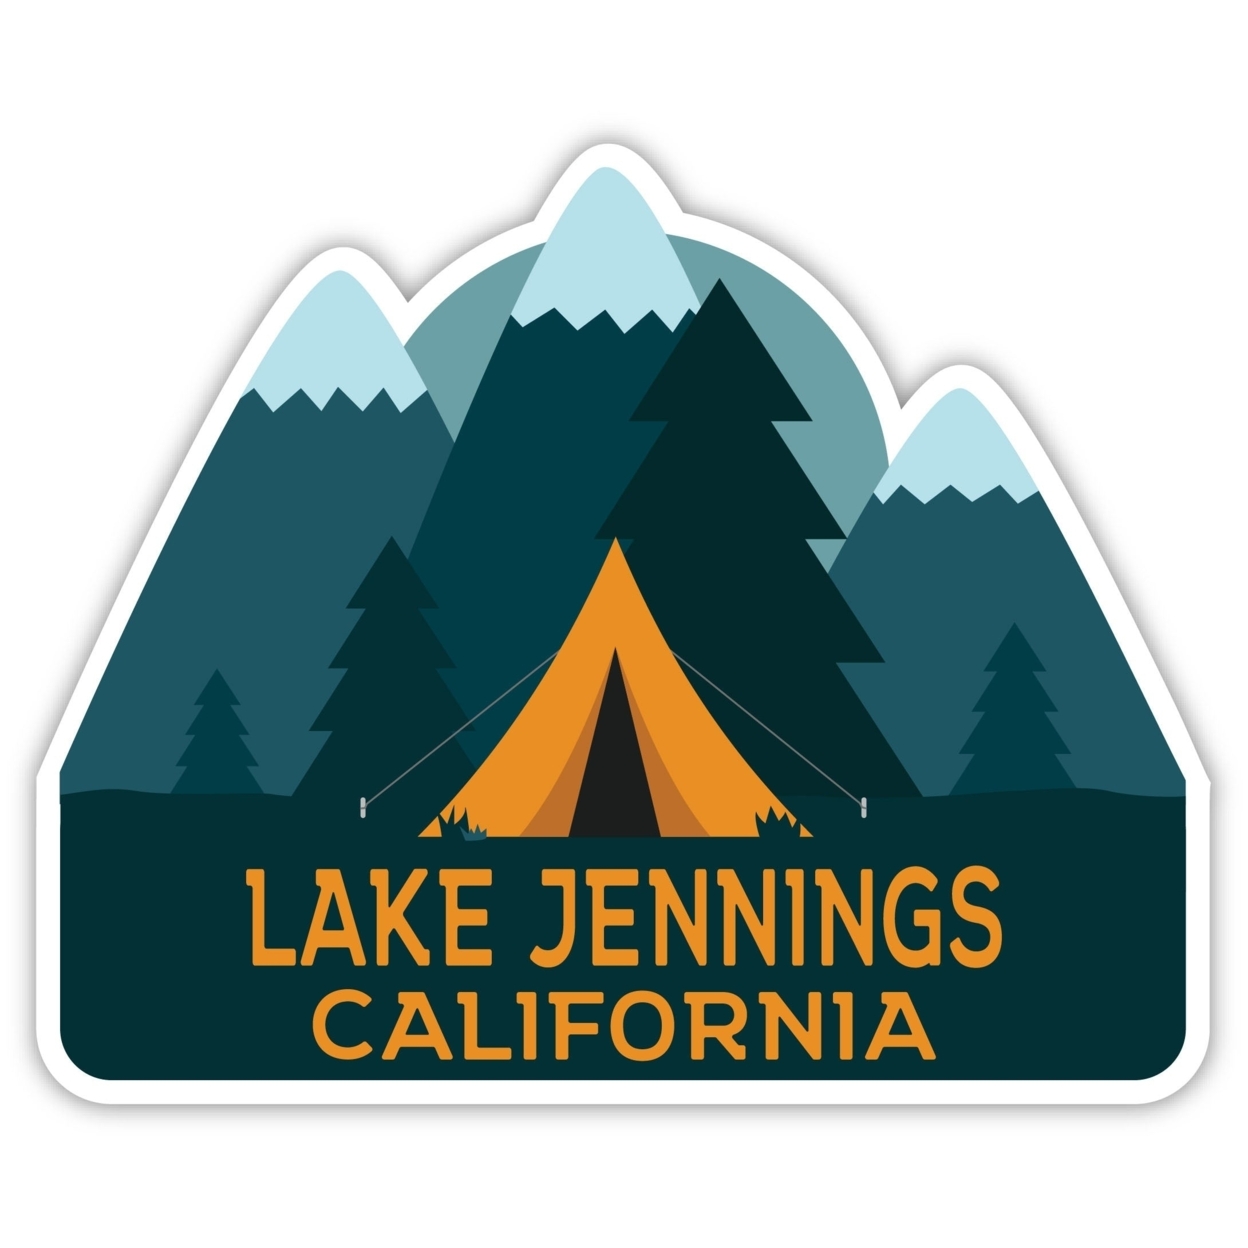 Lake Jennings California Souvenir Decorative Stickers (Choose Theme And Size) - 4-Inch, Adventures Awaits